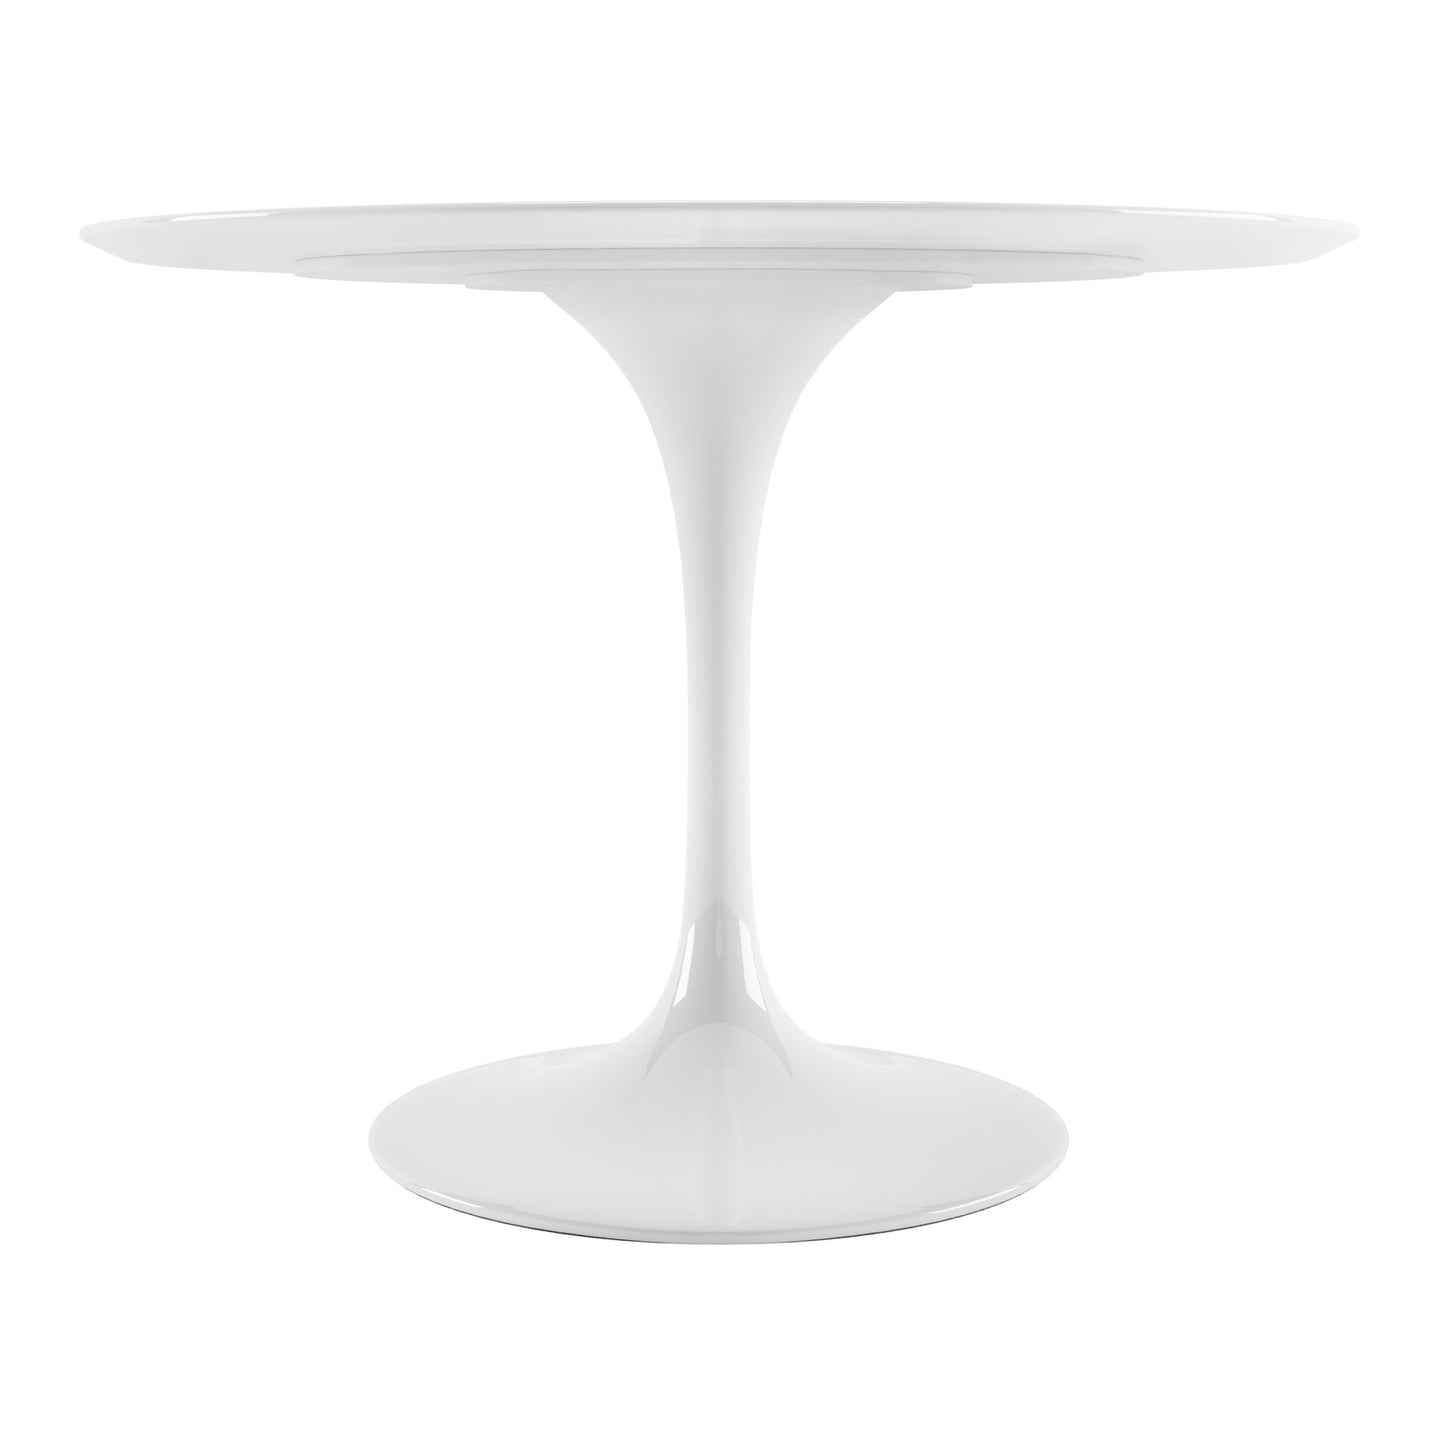 42" White Fiberglass And Metal Dining Table